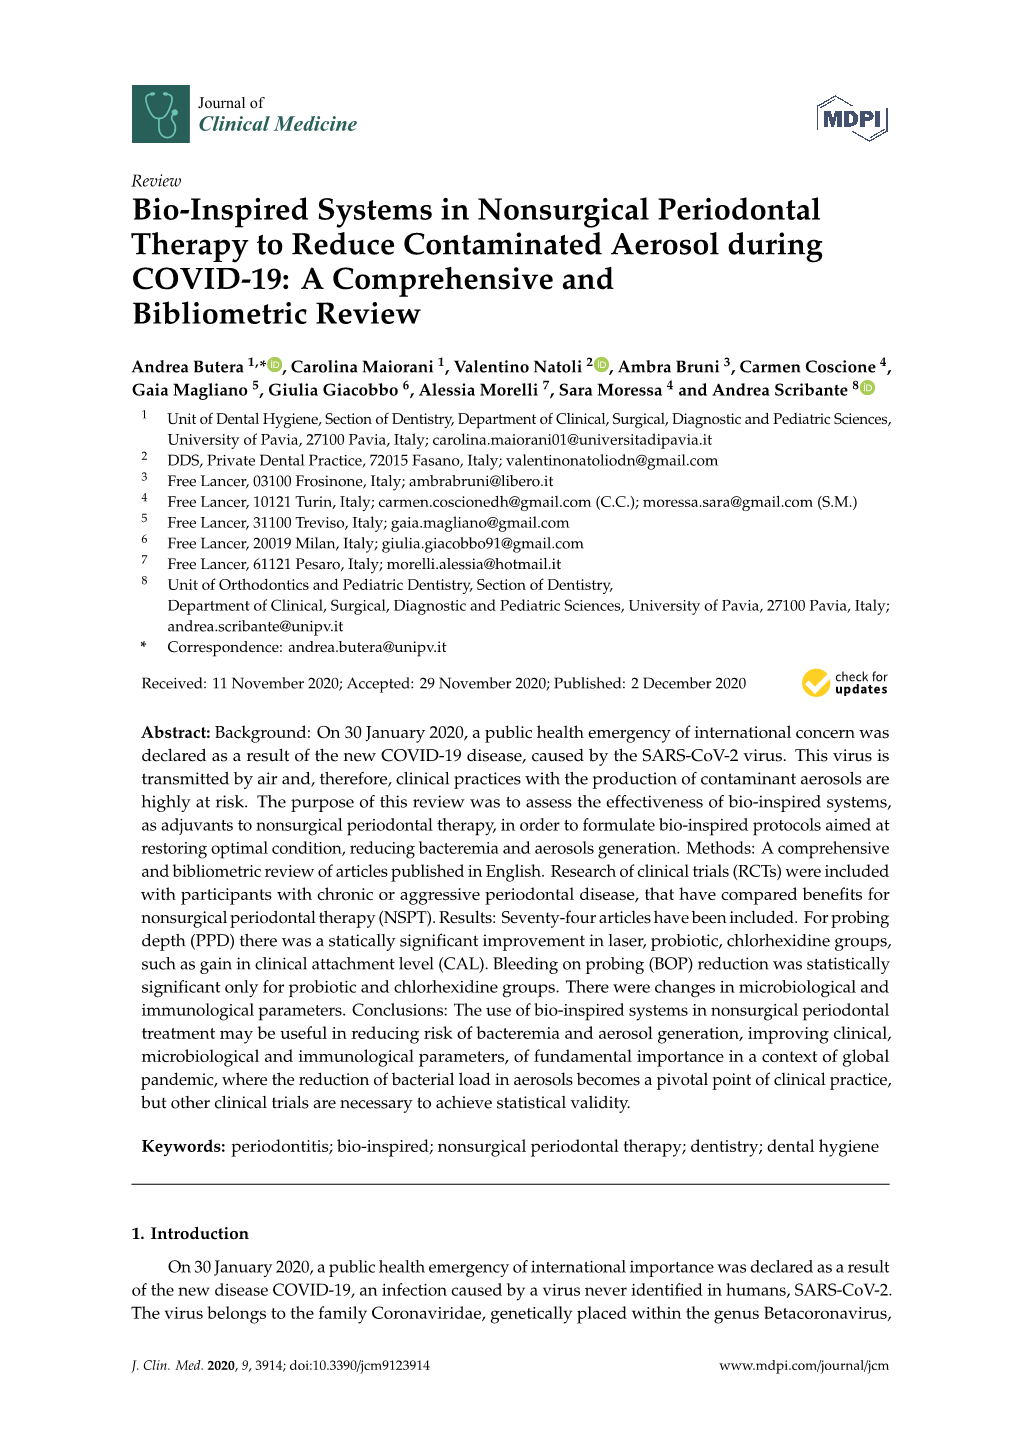 Bio-Inspired Systems in Nonsurgical Periodontal Therapy to Reduce Contaminated Aerosol During COVID-19: a Comprehensive and Bibliometric Review